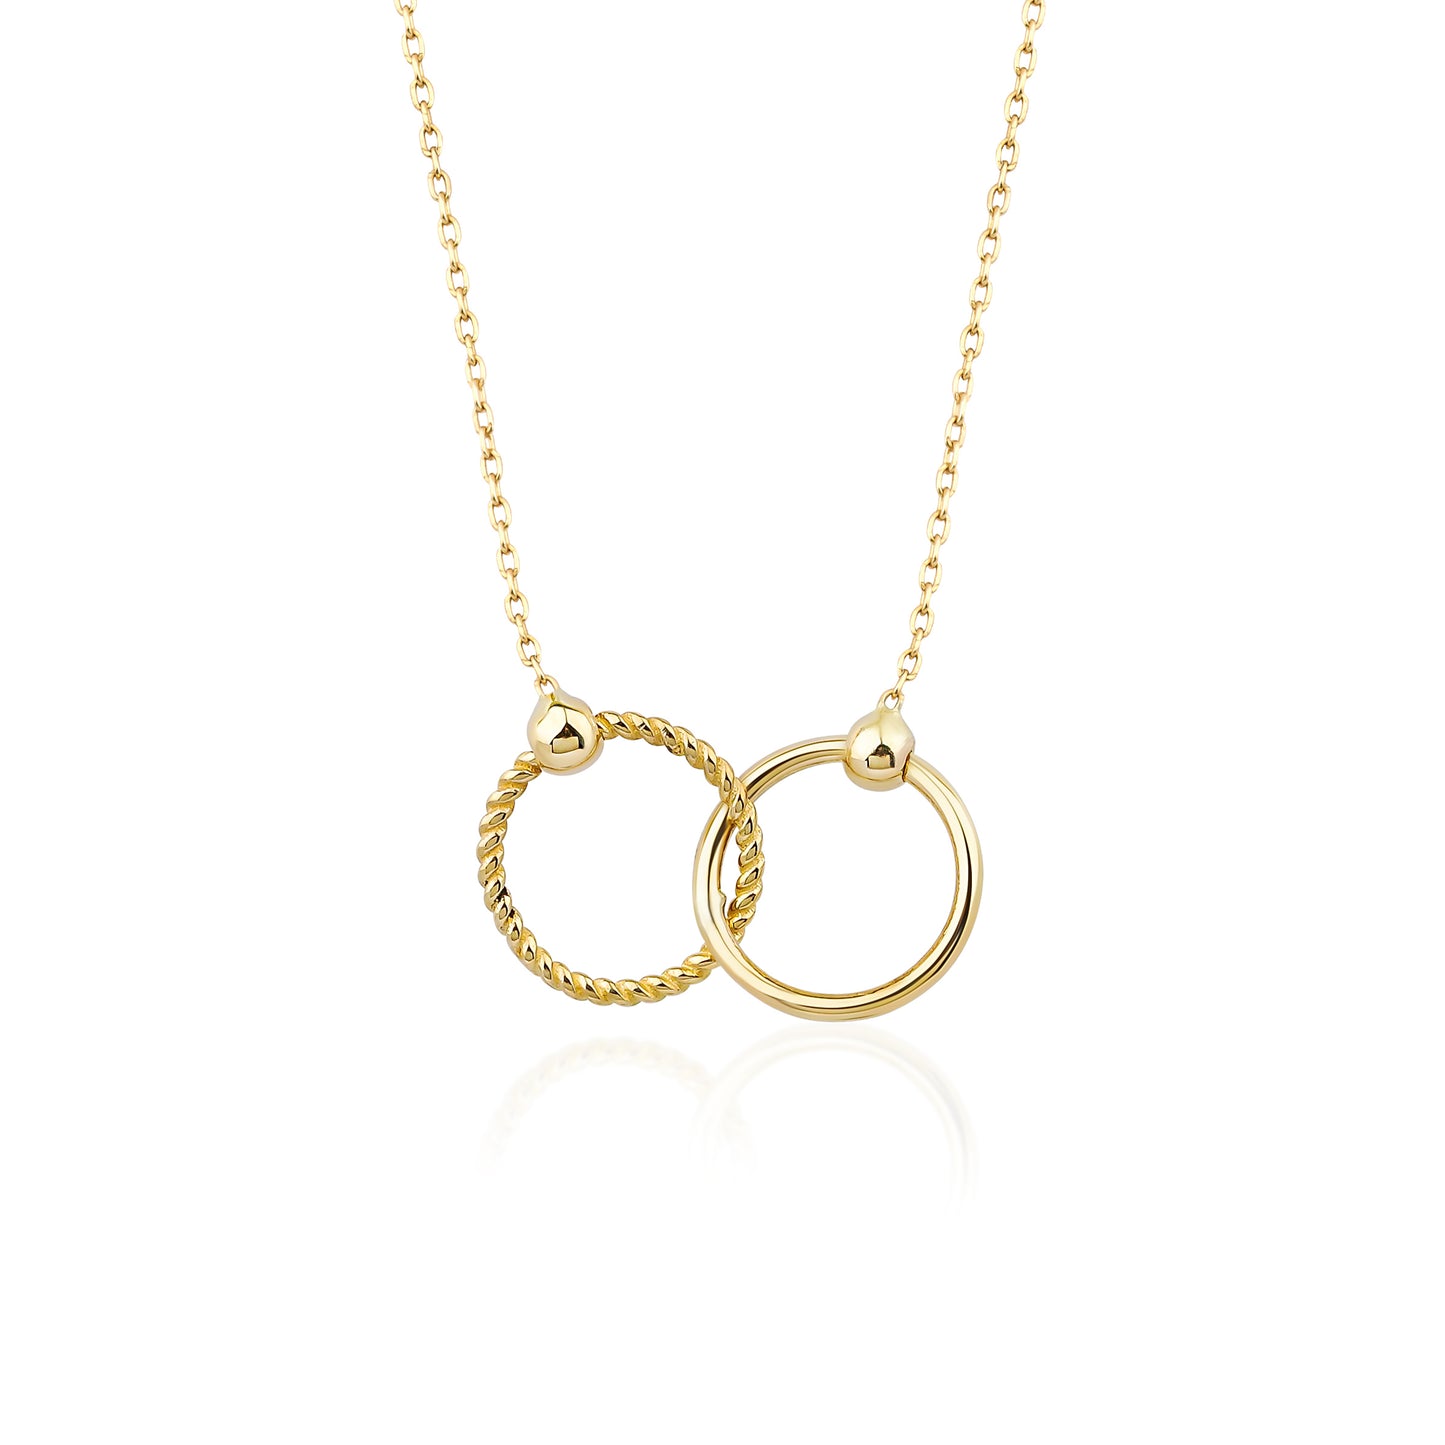 Intertwined Circles Necklace